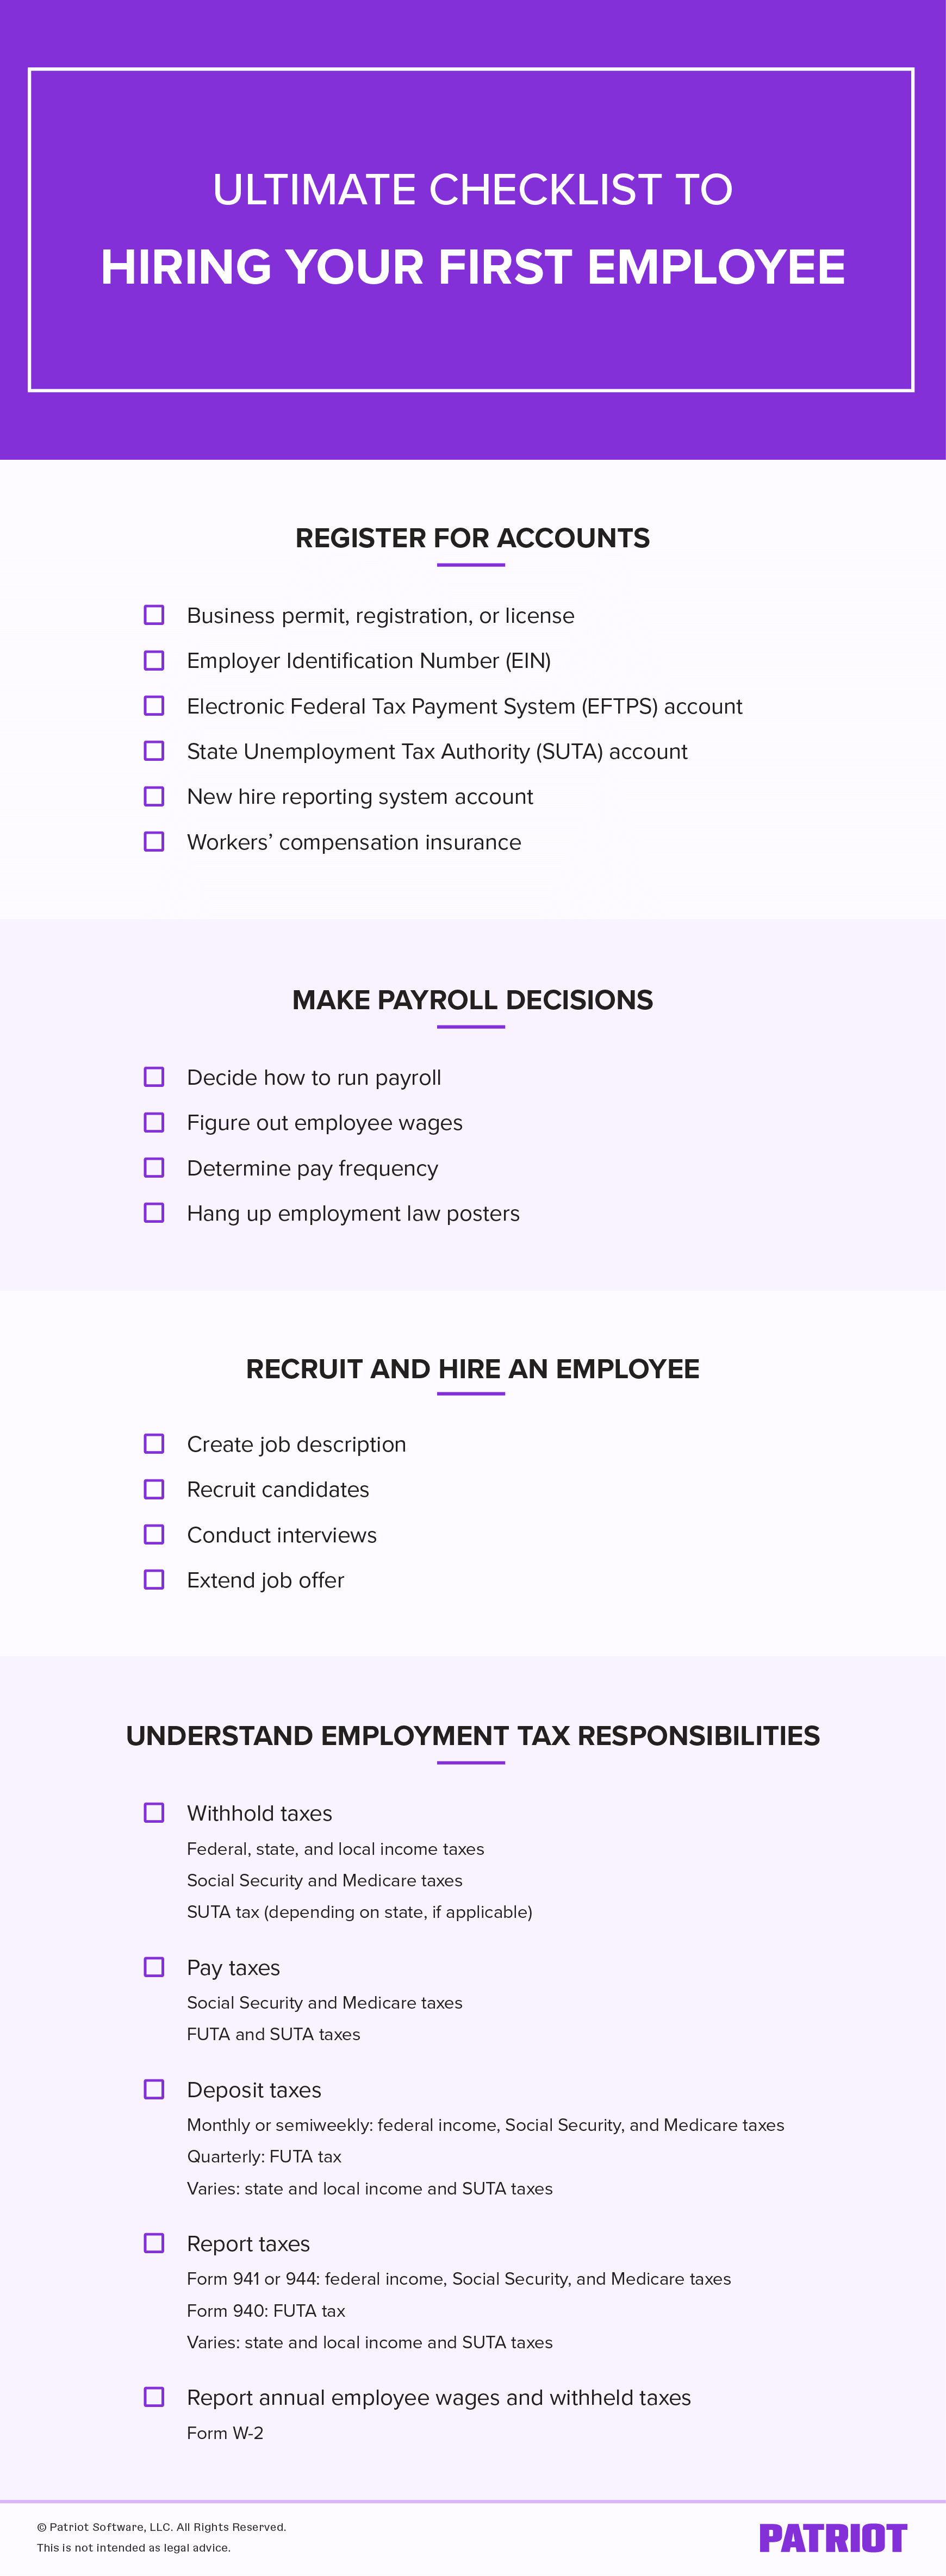 how to hire your first employee checklist